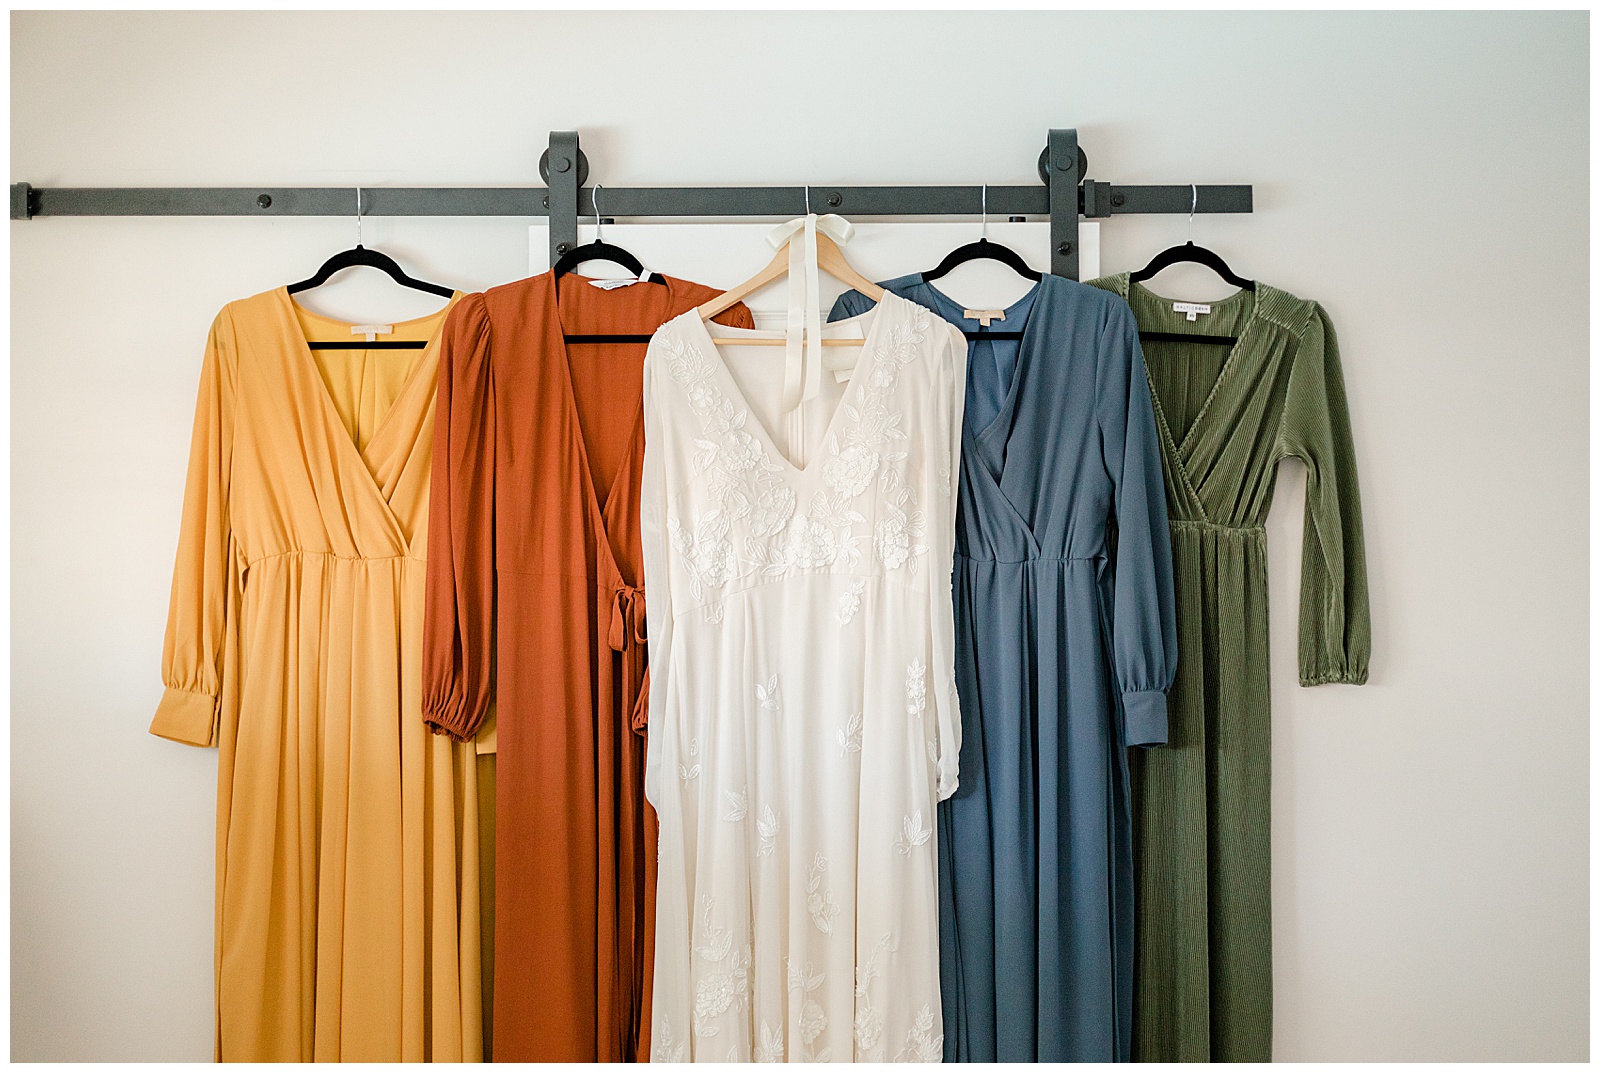 Boho colored dresses hanging on a wall.